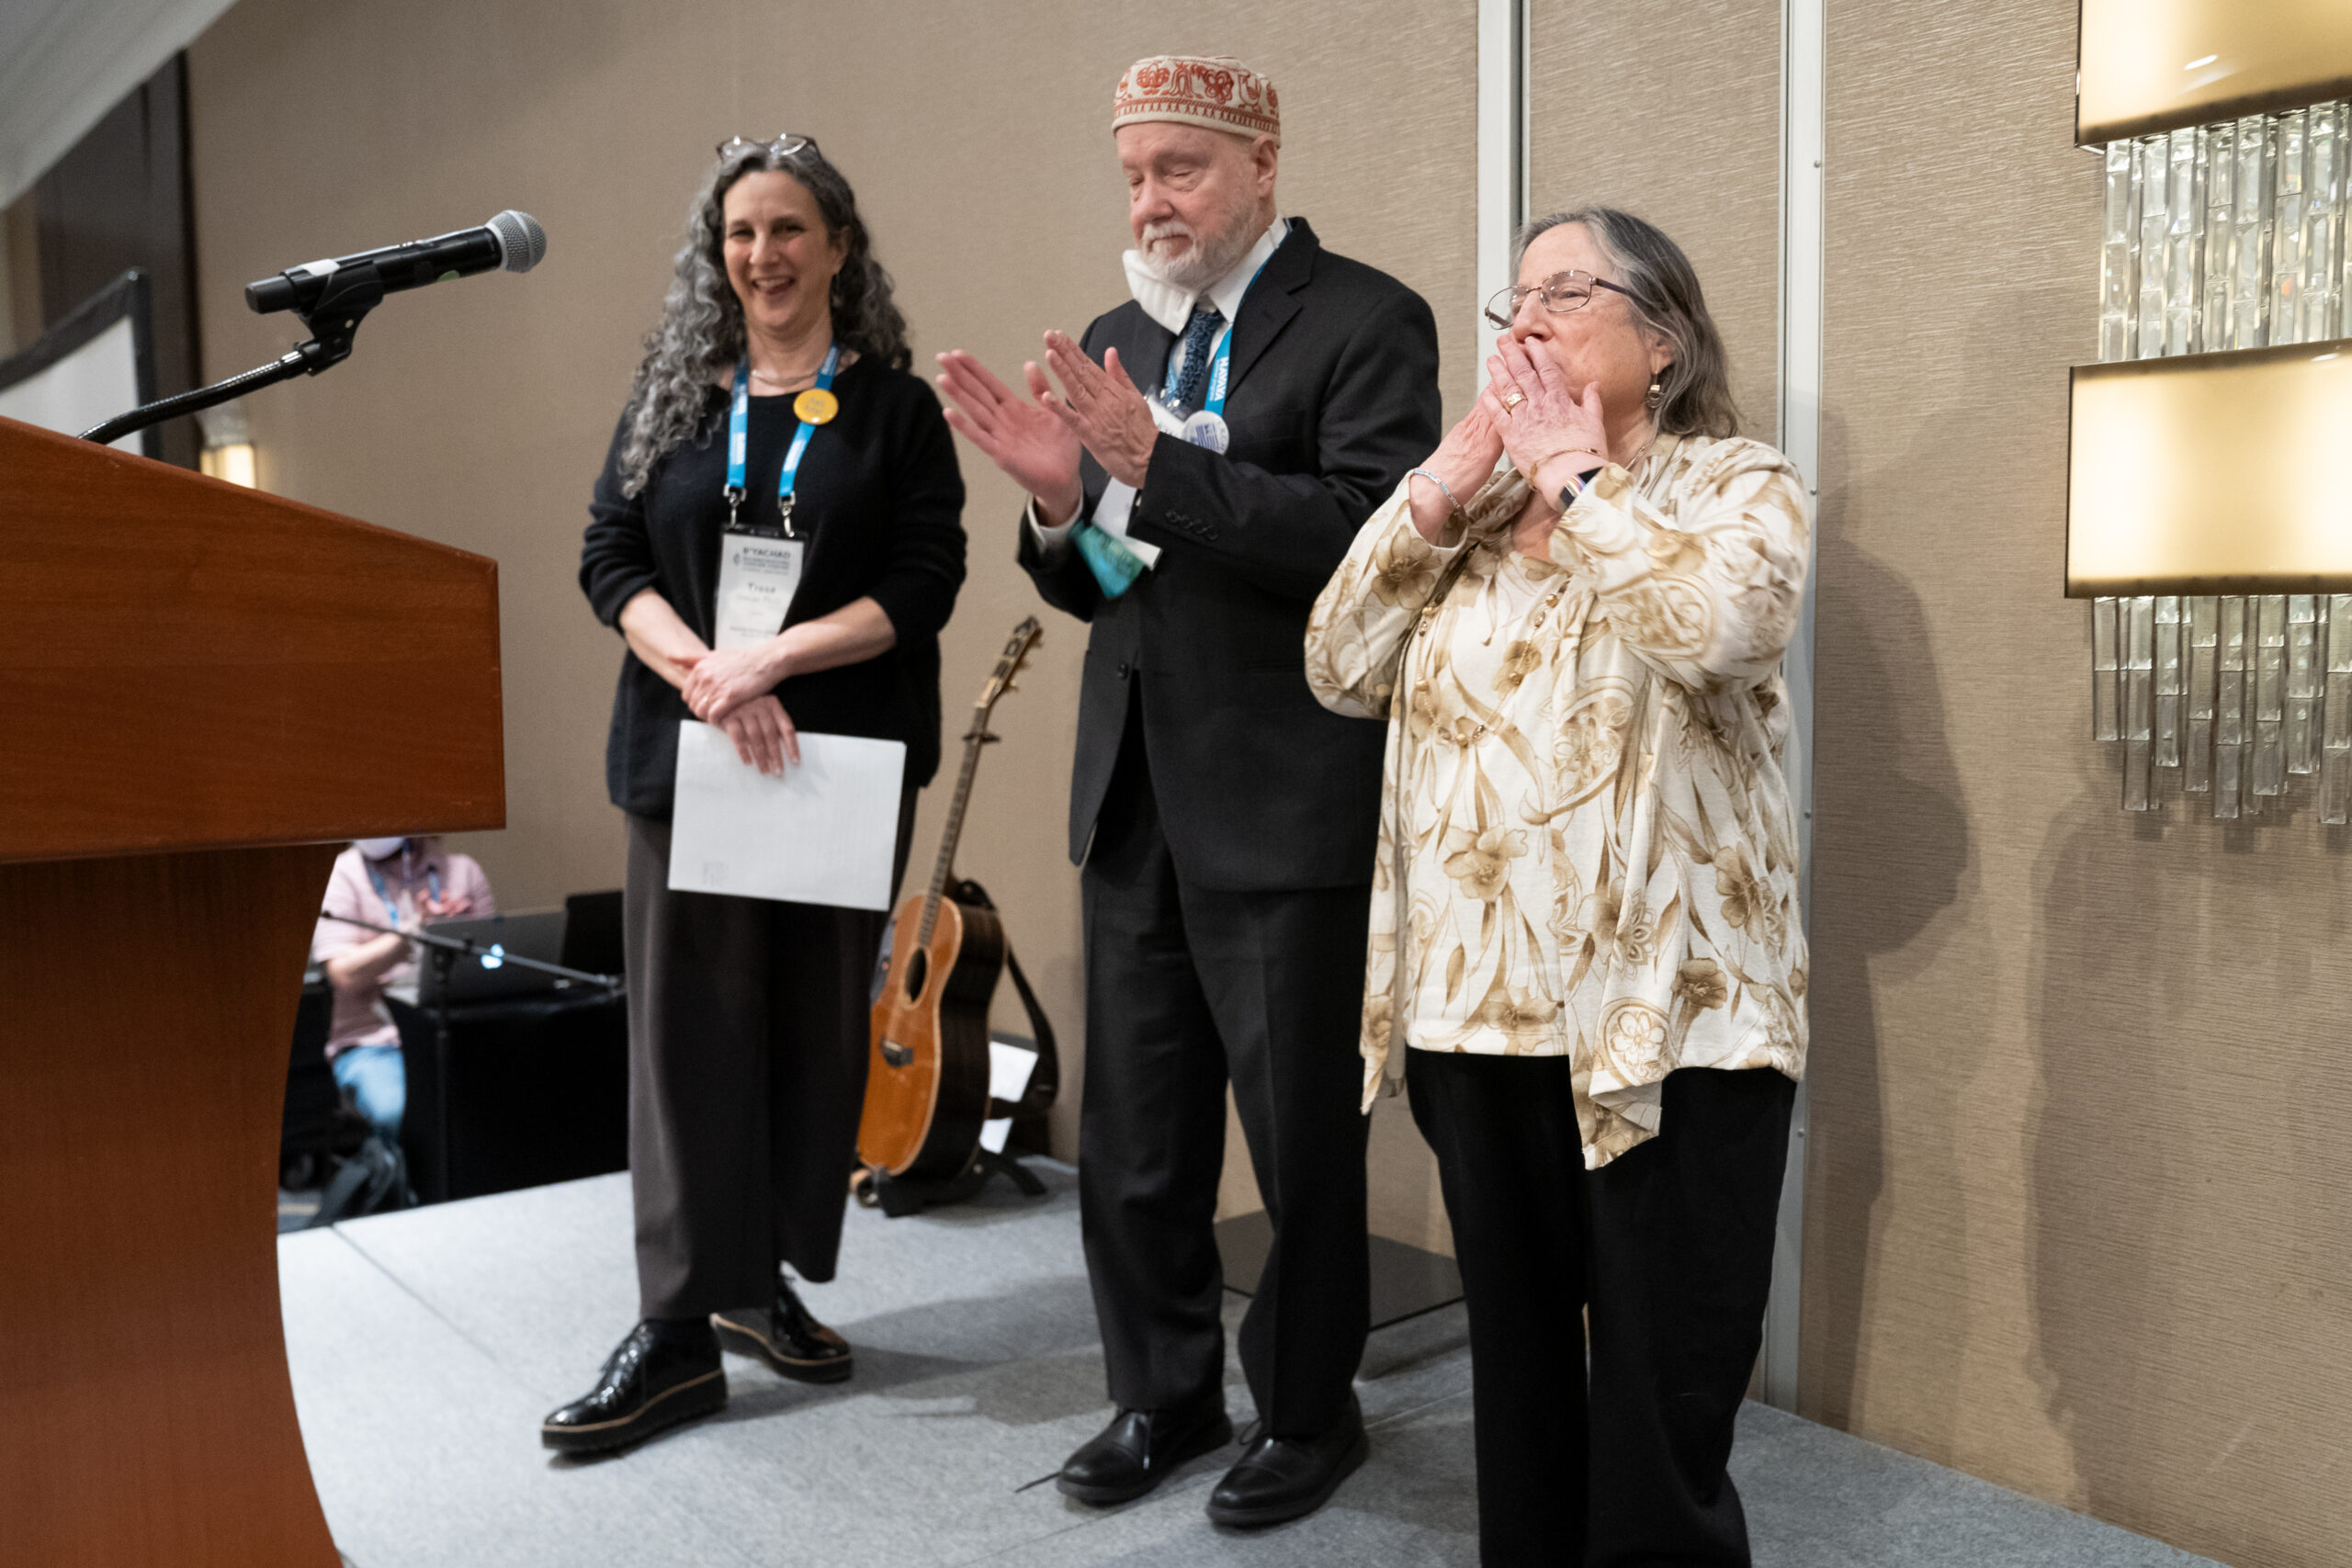 Tresa Grauer, John Riehl and Jackie Land share the stage at Reconstructing Judaism's 2022 convention.